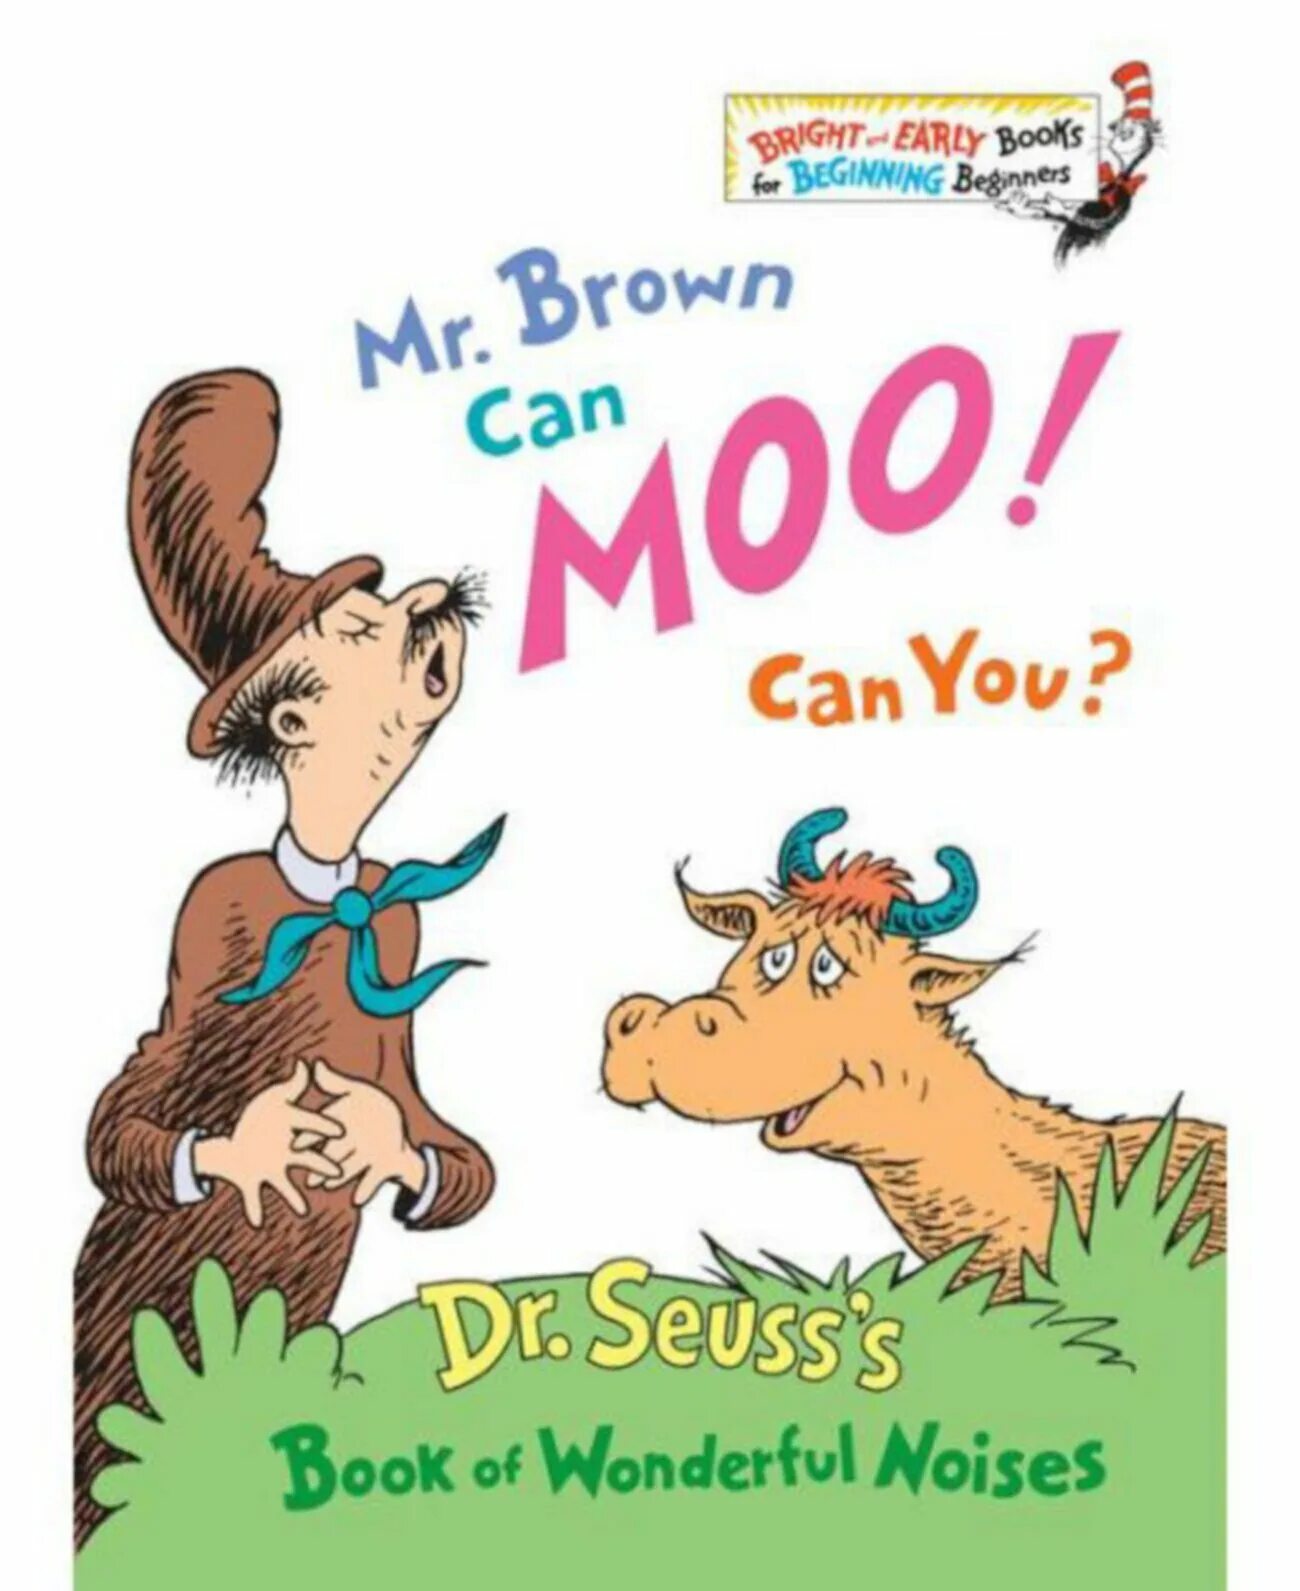 I can brown. Mr. Brown can Moo! Can you?. Mr Brown. Dr suess my book.